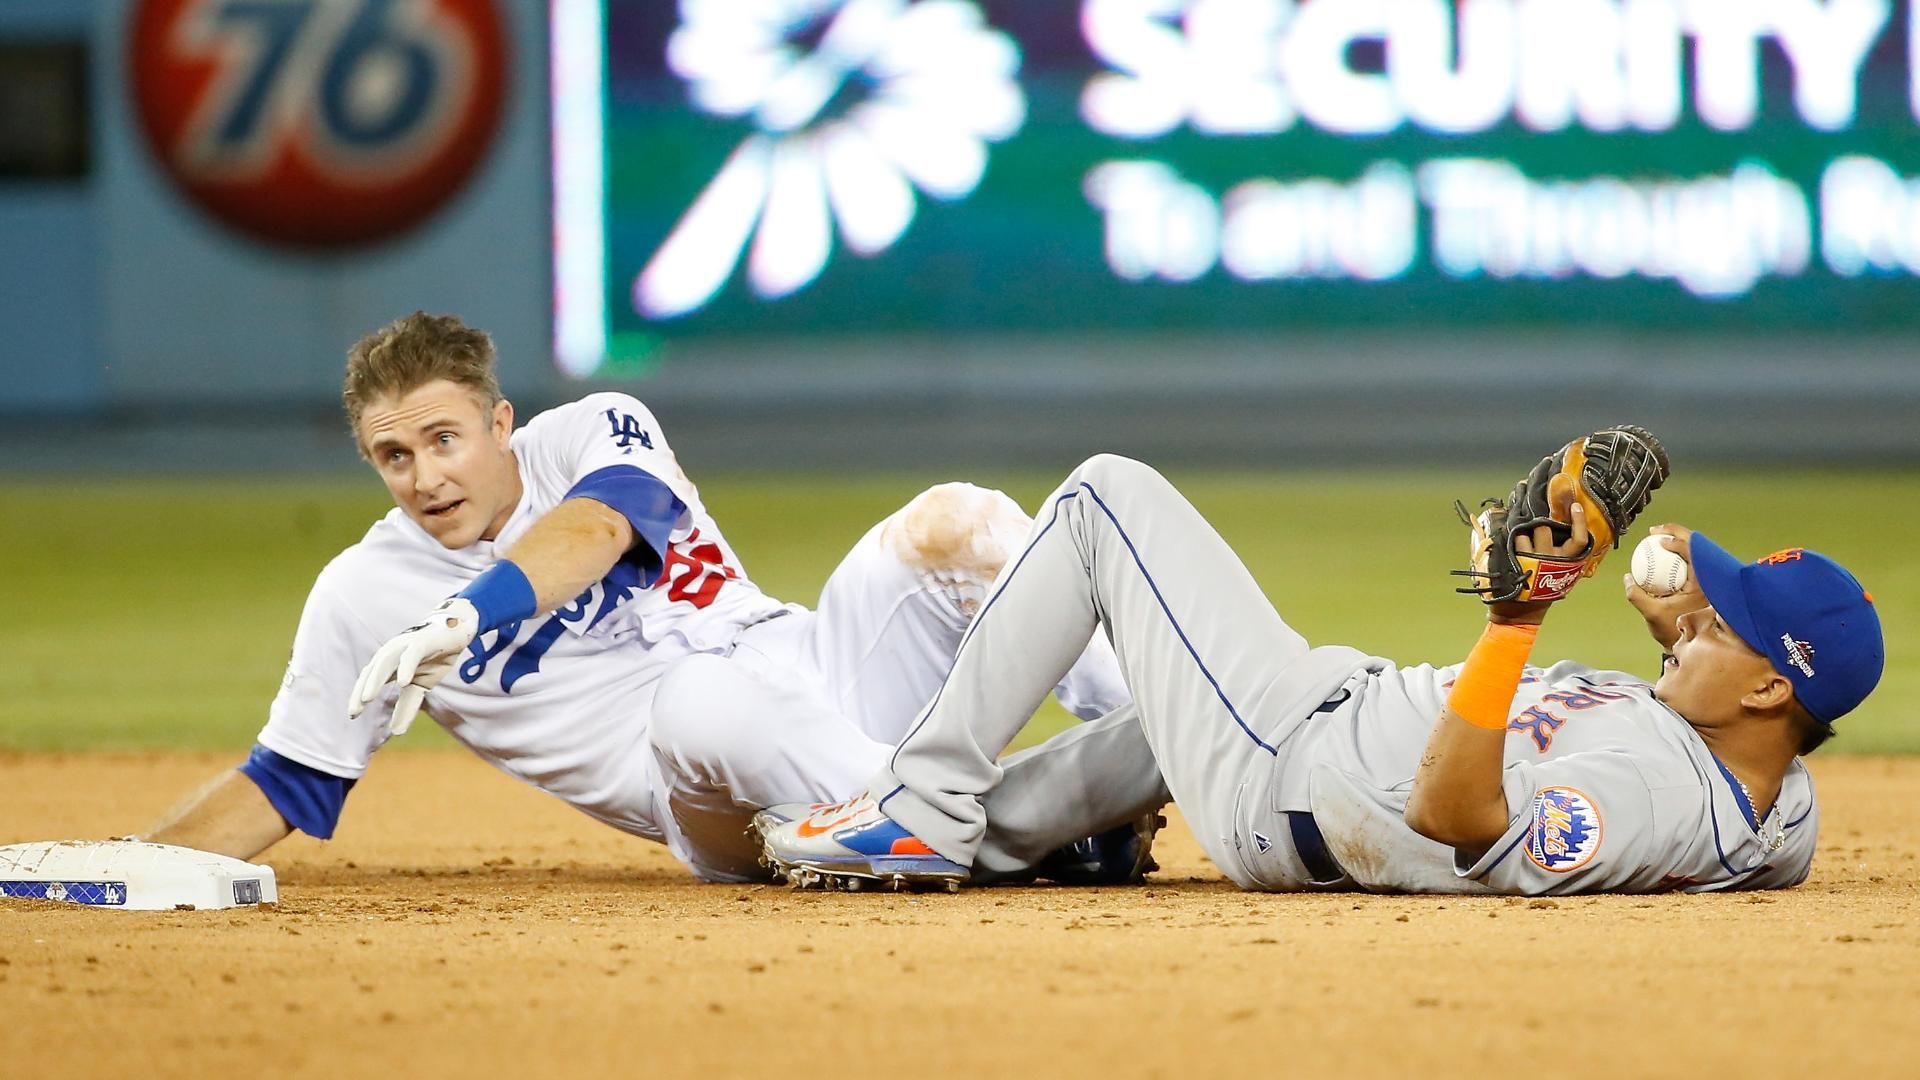 Chase Utley's slide was dirty. Here's the video proof.